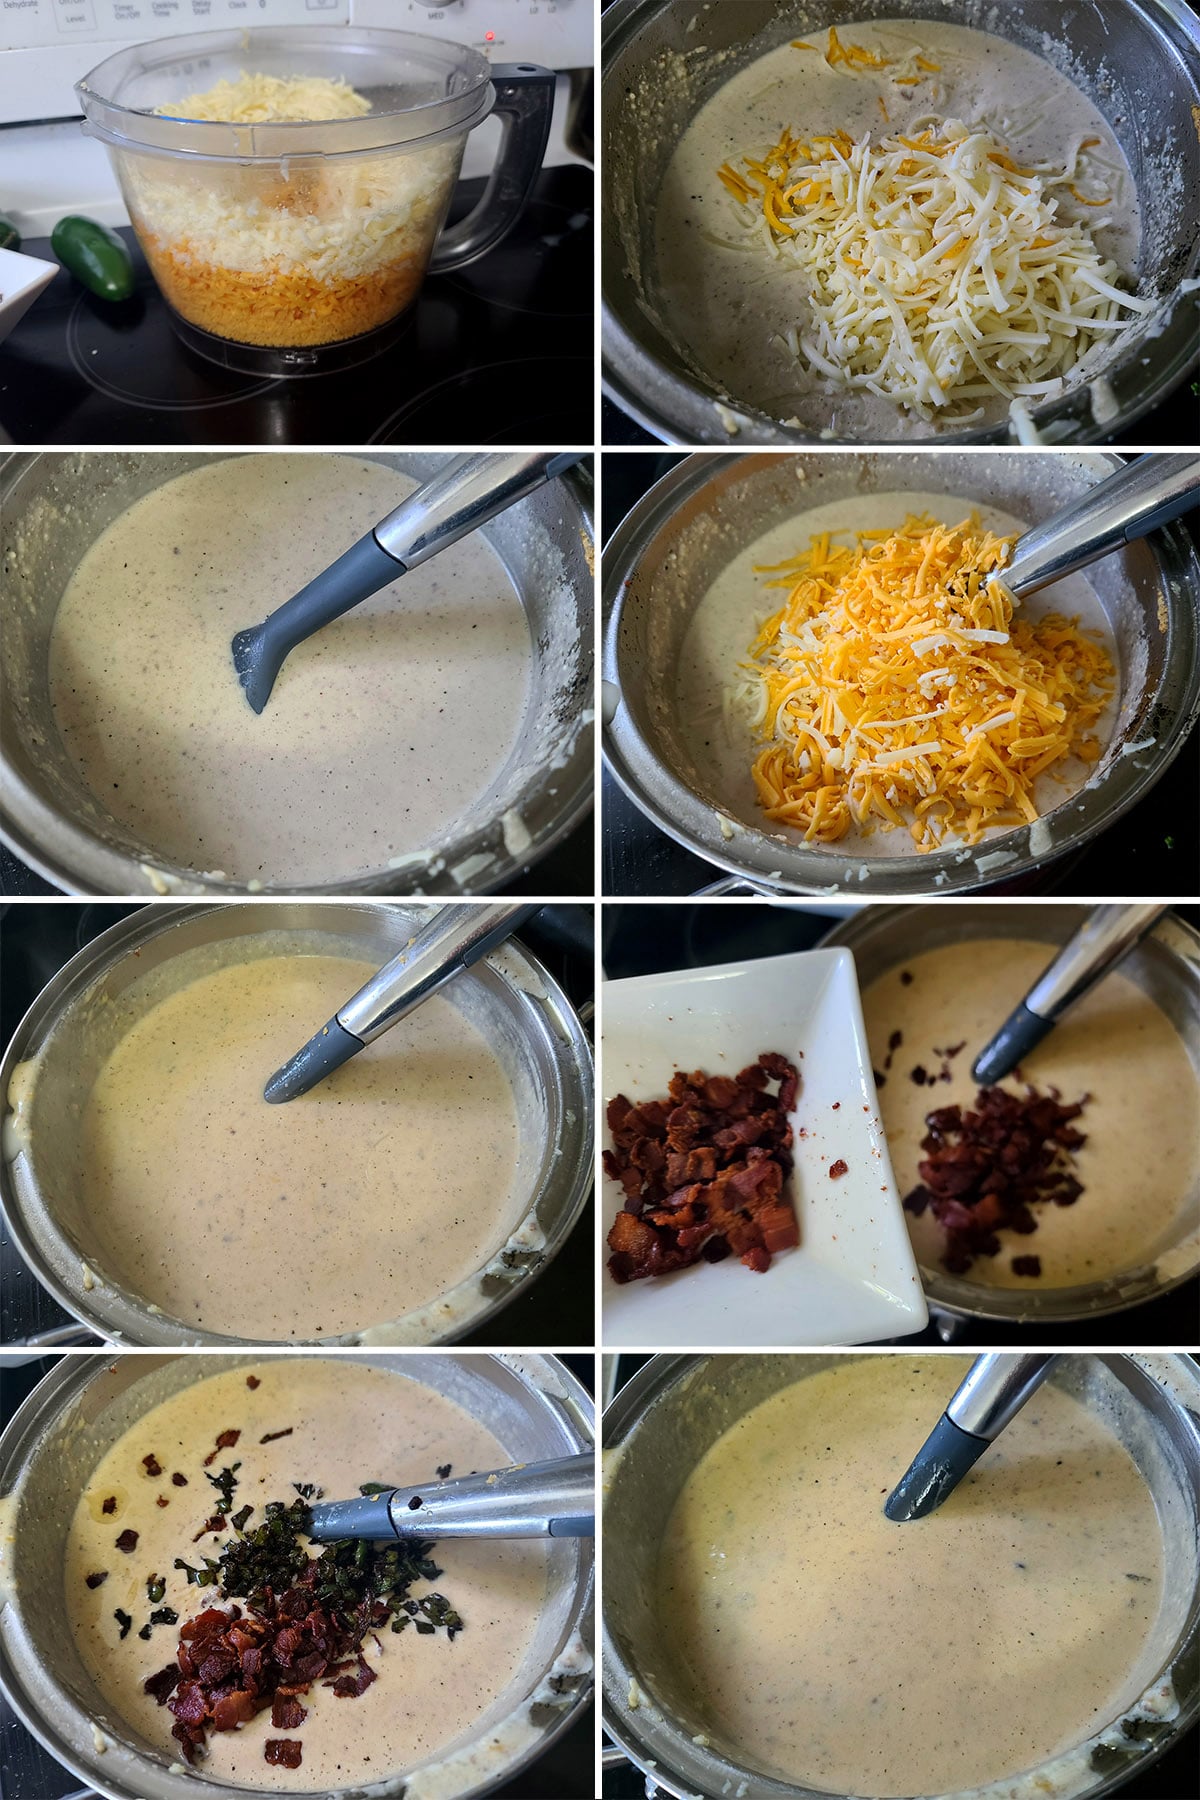 An 8 part image showing cheese being added to the sauce in batches, then the bacon and jalapenos being added to the pot.